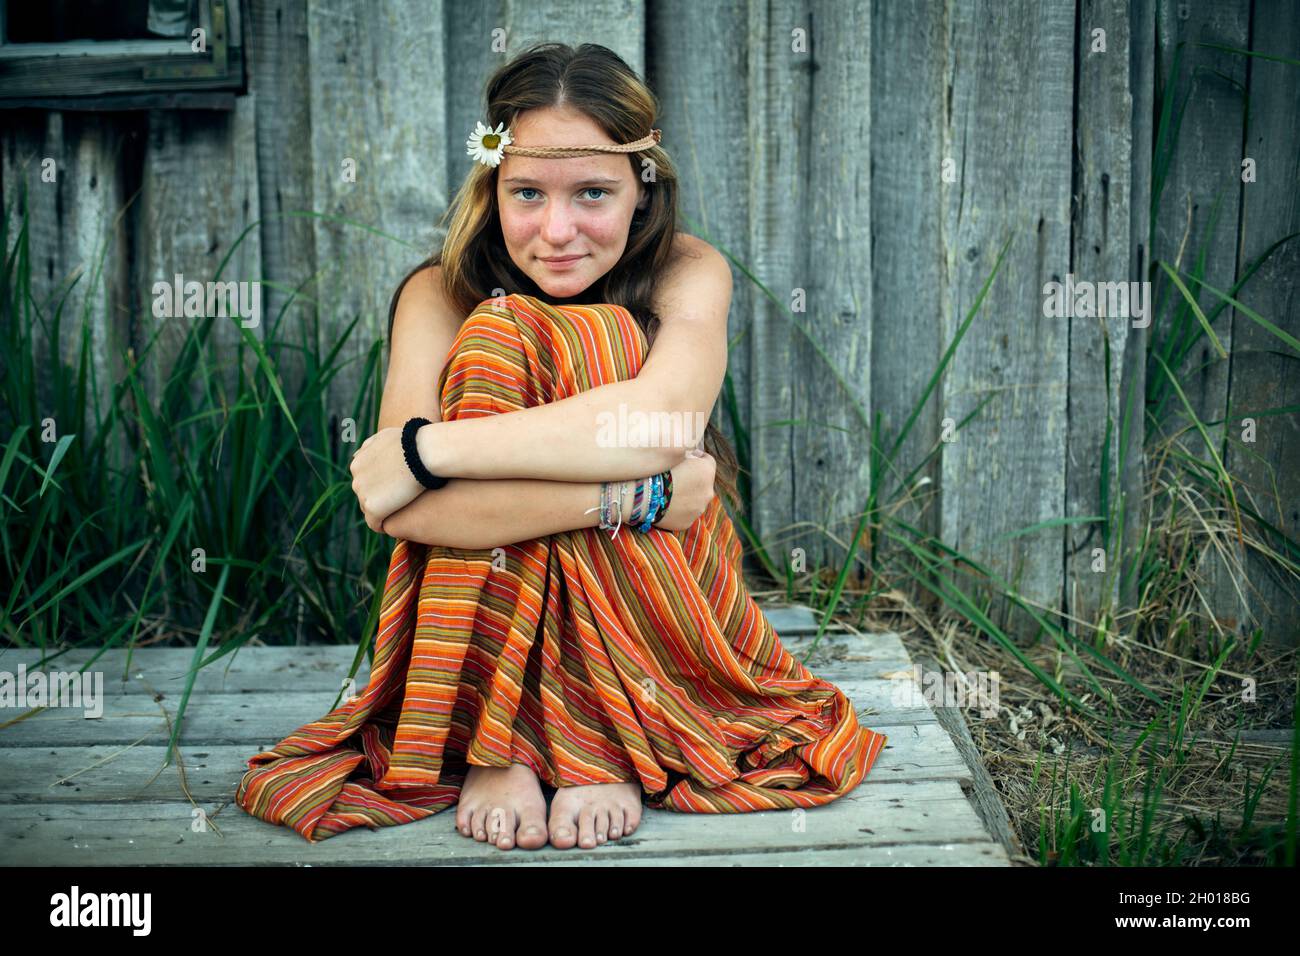 https://c8.alamy.com/comp/2H018BG/a-girl-in-hippie-clothes-sitting-alone-in-the-village-outdoors-2H018BG.jpg